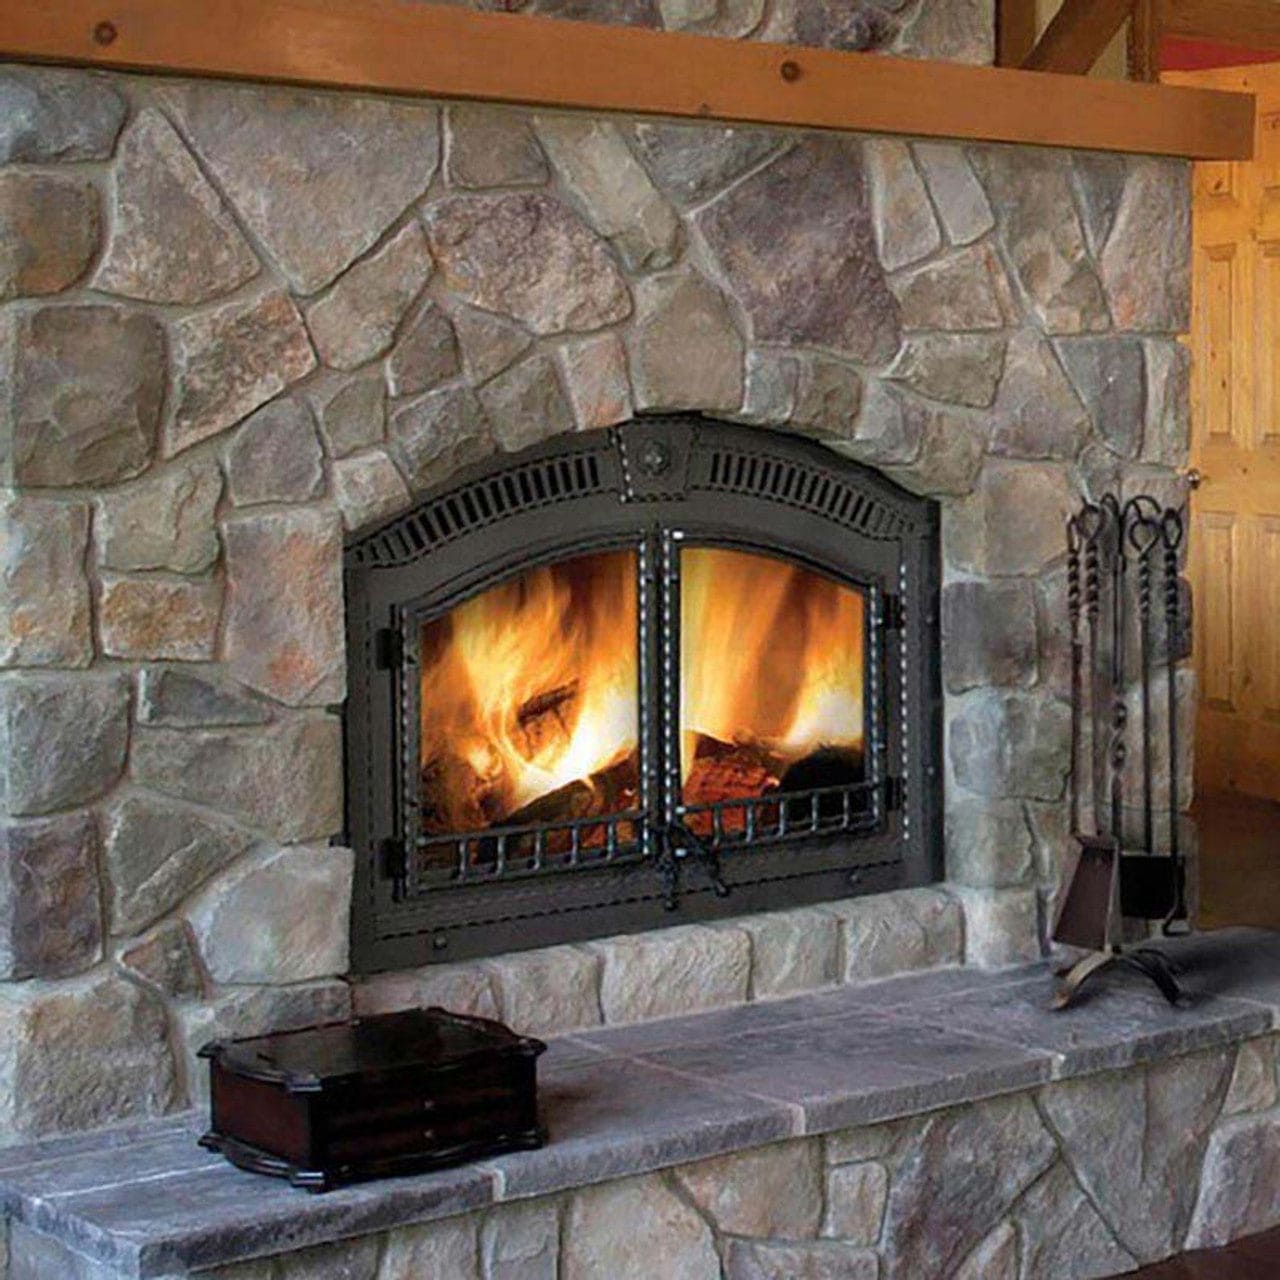 Napoleon High Country 6000 Zero Clearance Wood-Burning Fireplace - NZ6000-1 - Chimney Cricket